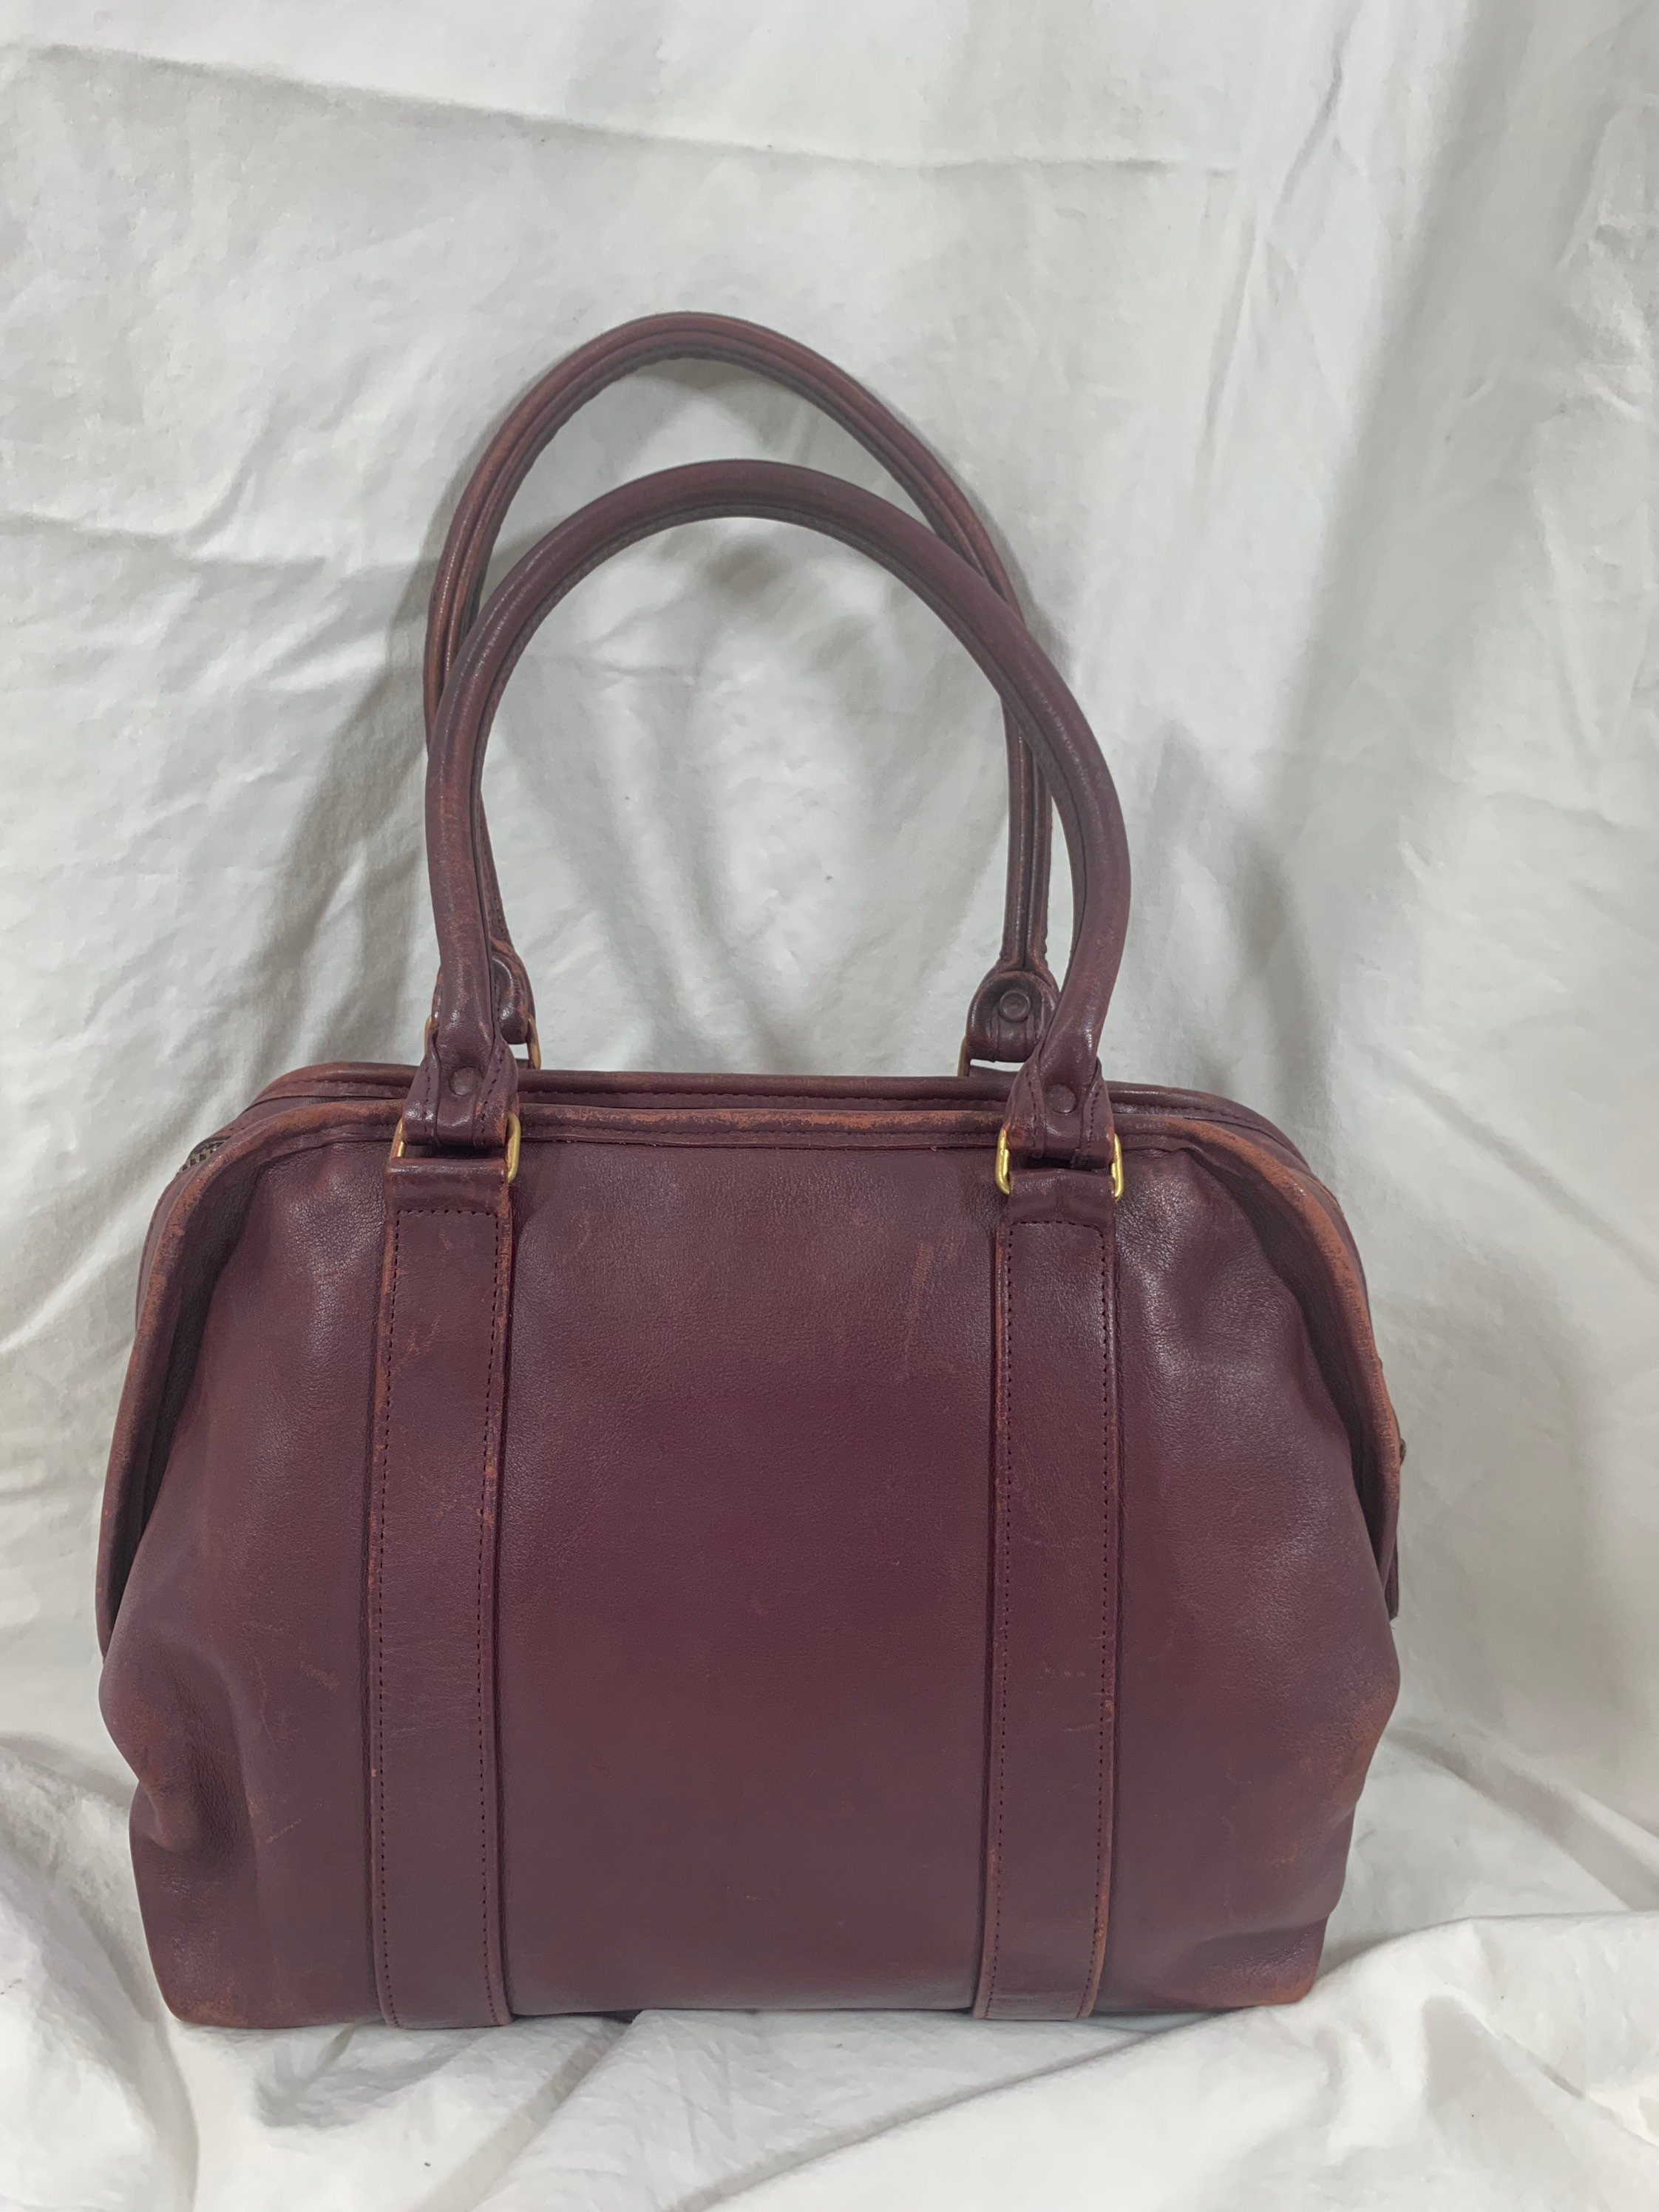 Authentic Coach F31352 Large Sierra Domed Oxblood Leather Satchel NWOT  BEAUTIFUL